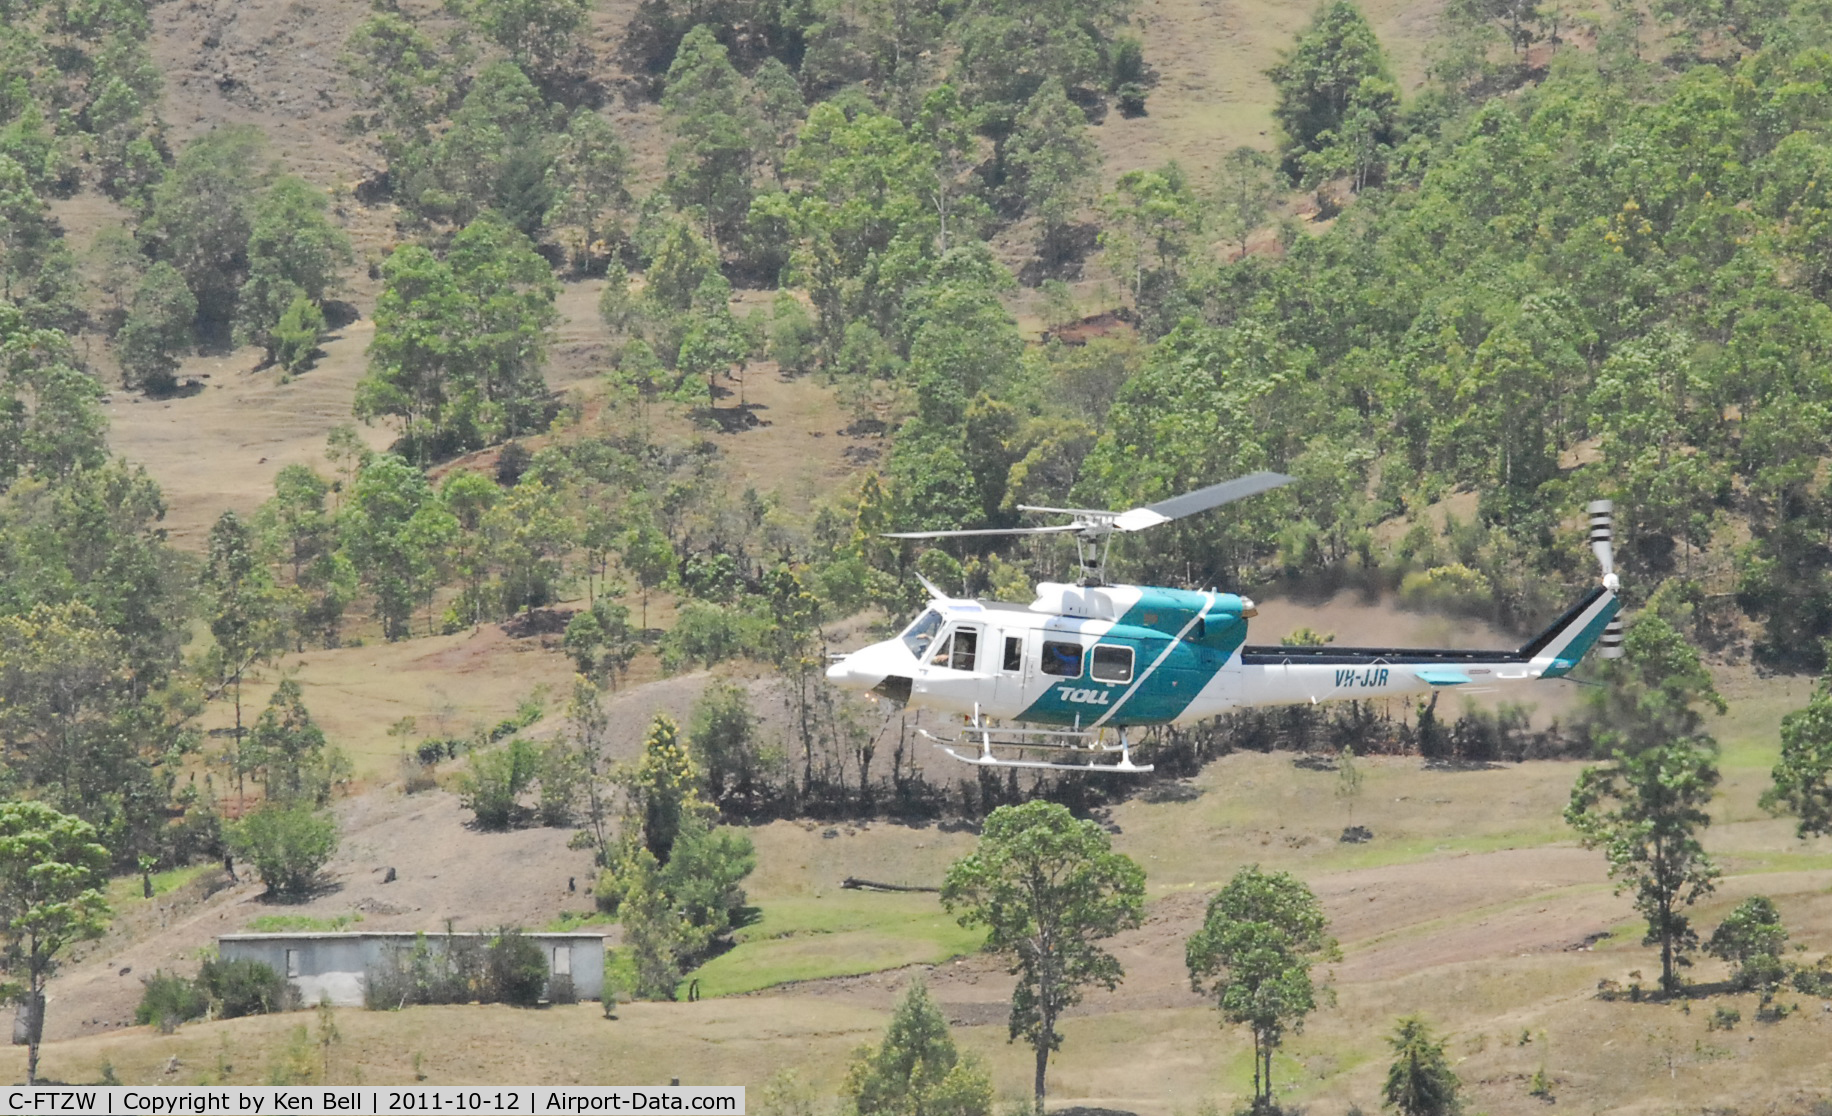 C-FTZW, Bell 212 C/N 31280, This aricraft, now registered in Australia as VH - JJR is listed as serial number 31280. The Photo was taken by me, Ken Bell, in Hato Builico, Timor Leste on 12.10.2011 I belive it was ferrying a group of young hikers in to the area so they could walk to 